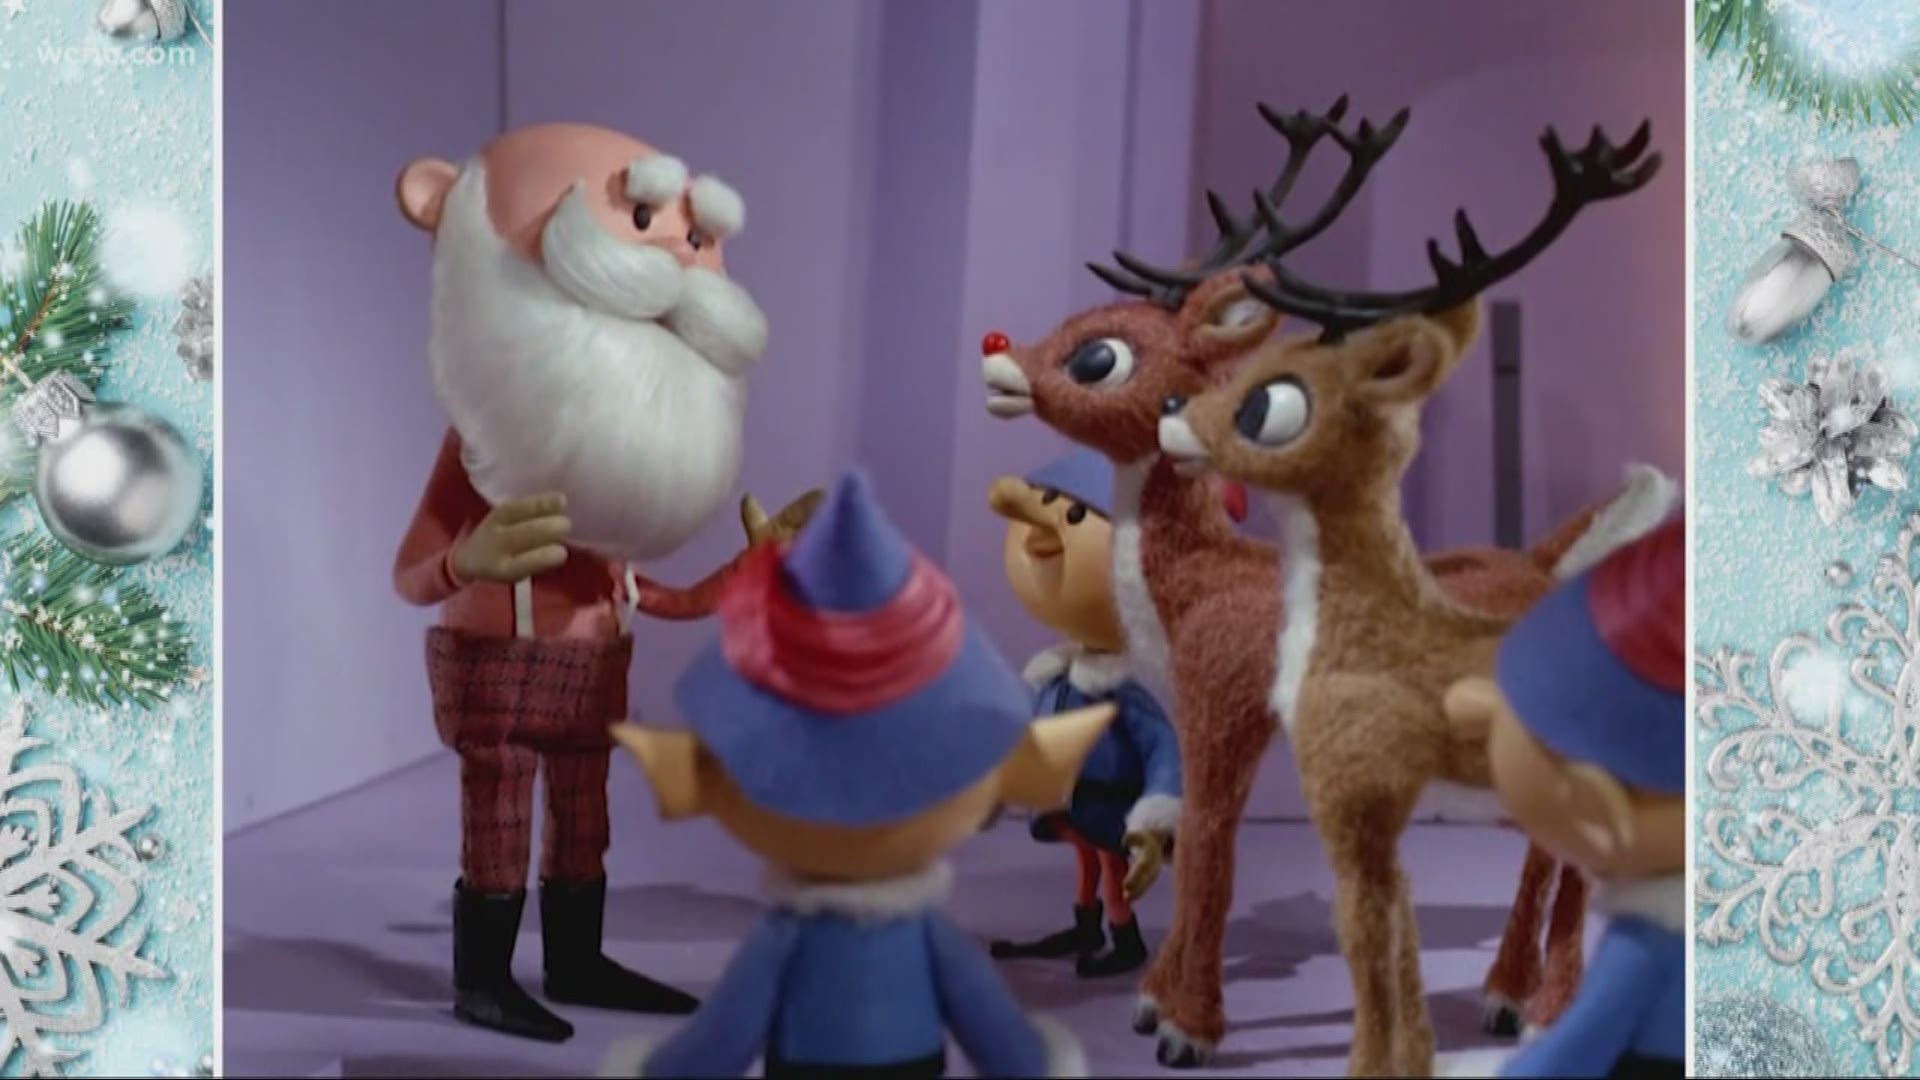 Watch Rudolph The Red Nosed Reindeer On KHOU 11 Tonight!